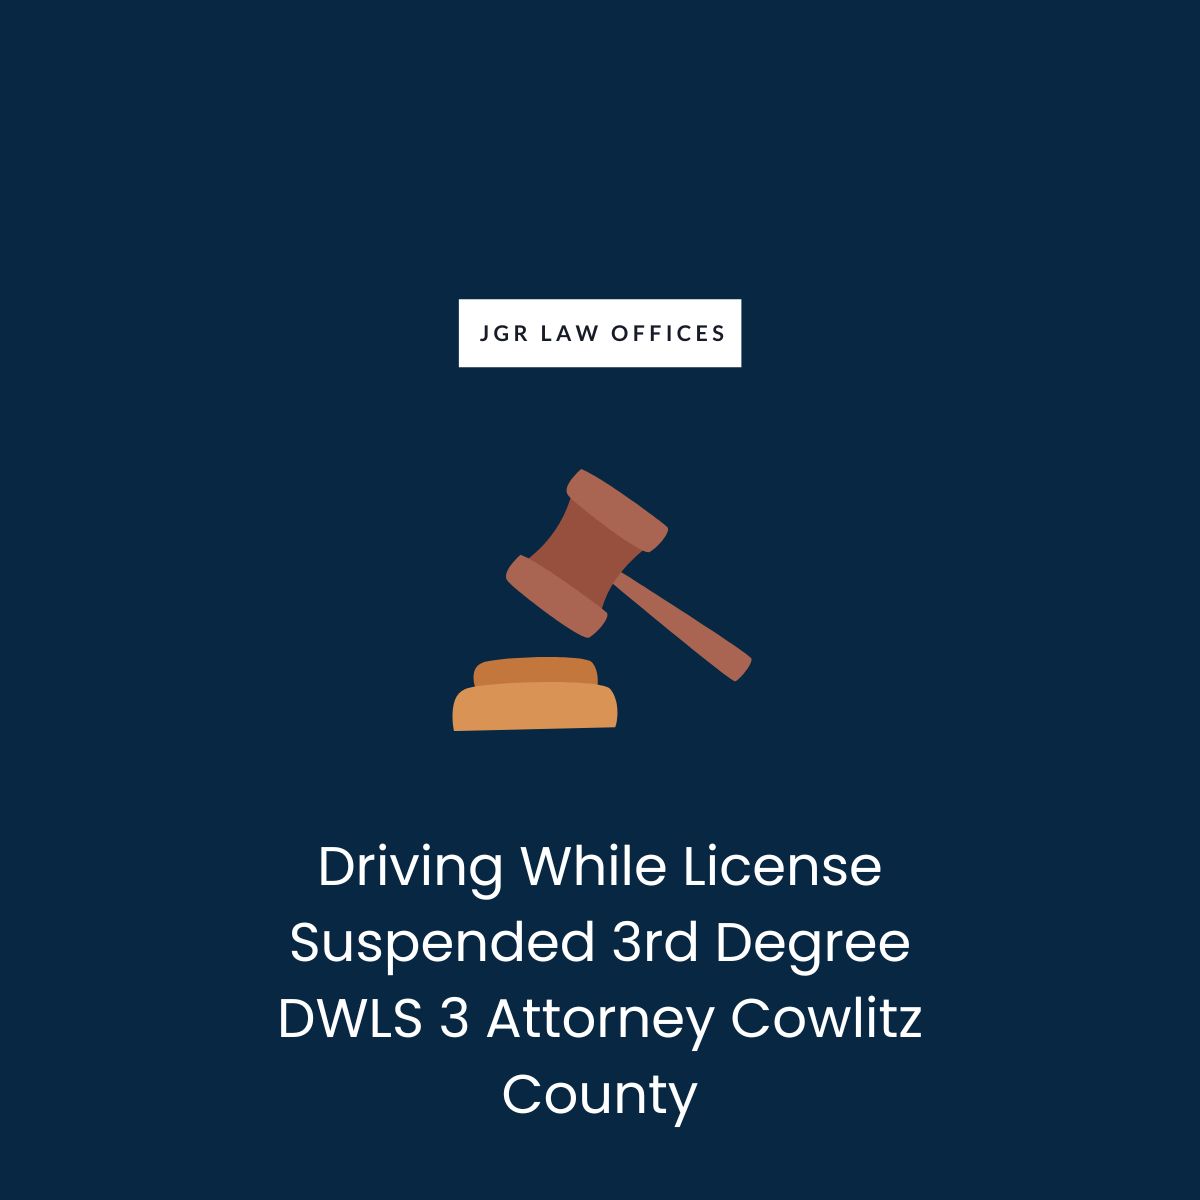 Driving While License Suspended 3rd Degree DWLS 3 Attorney Cowlitz County